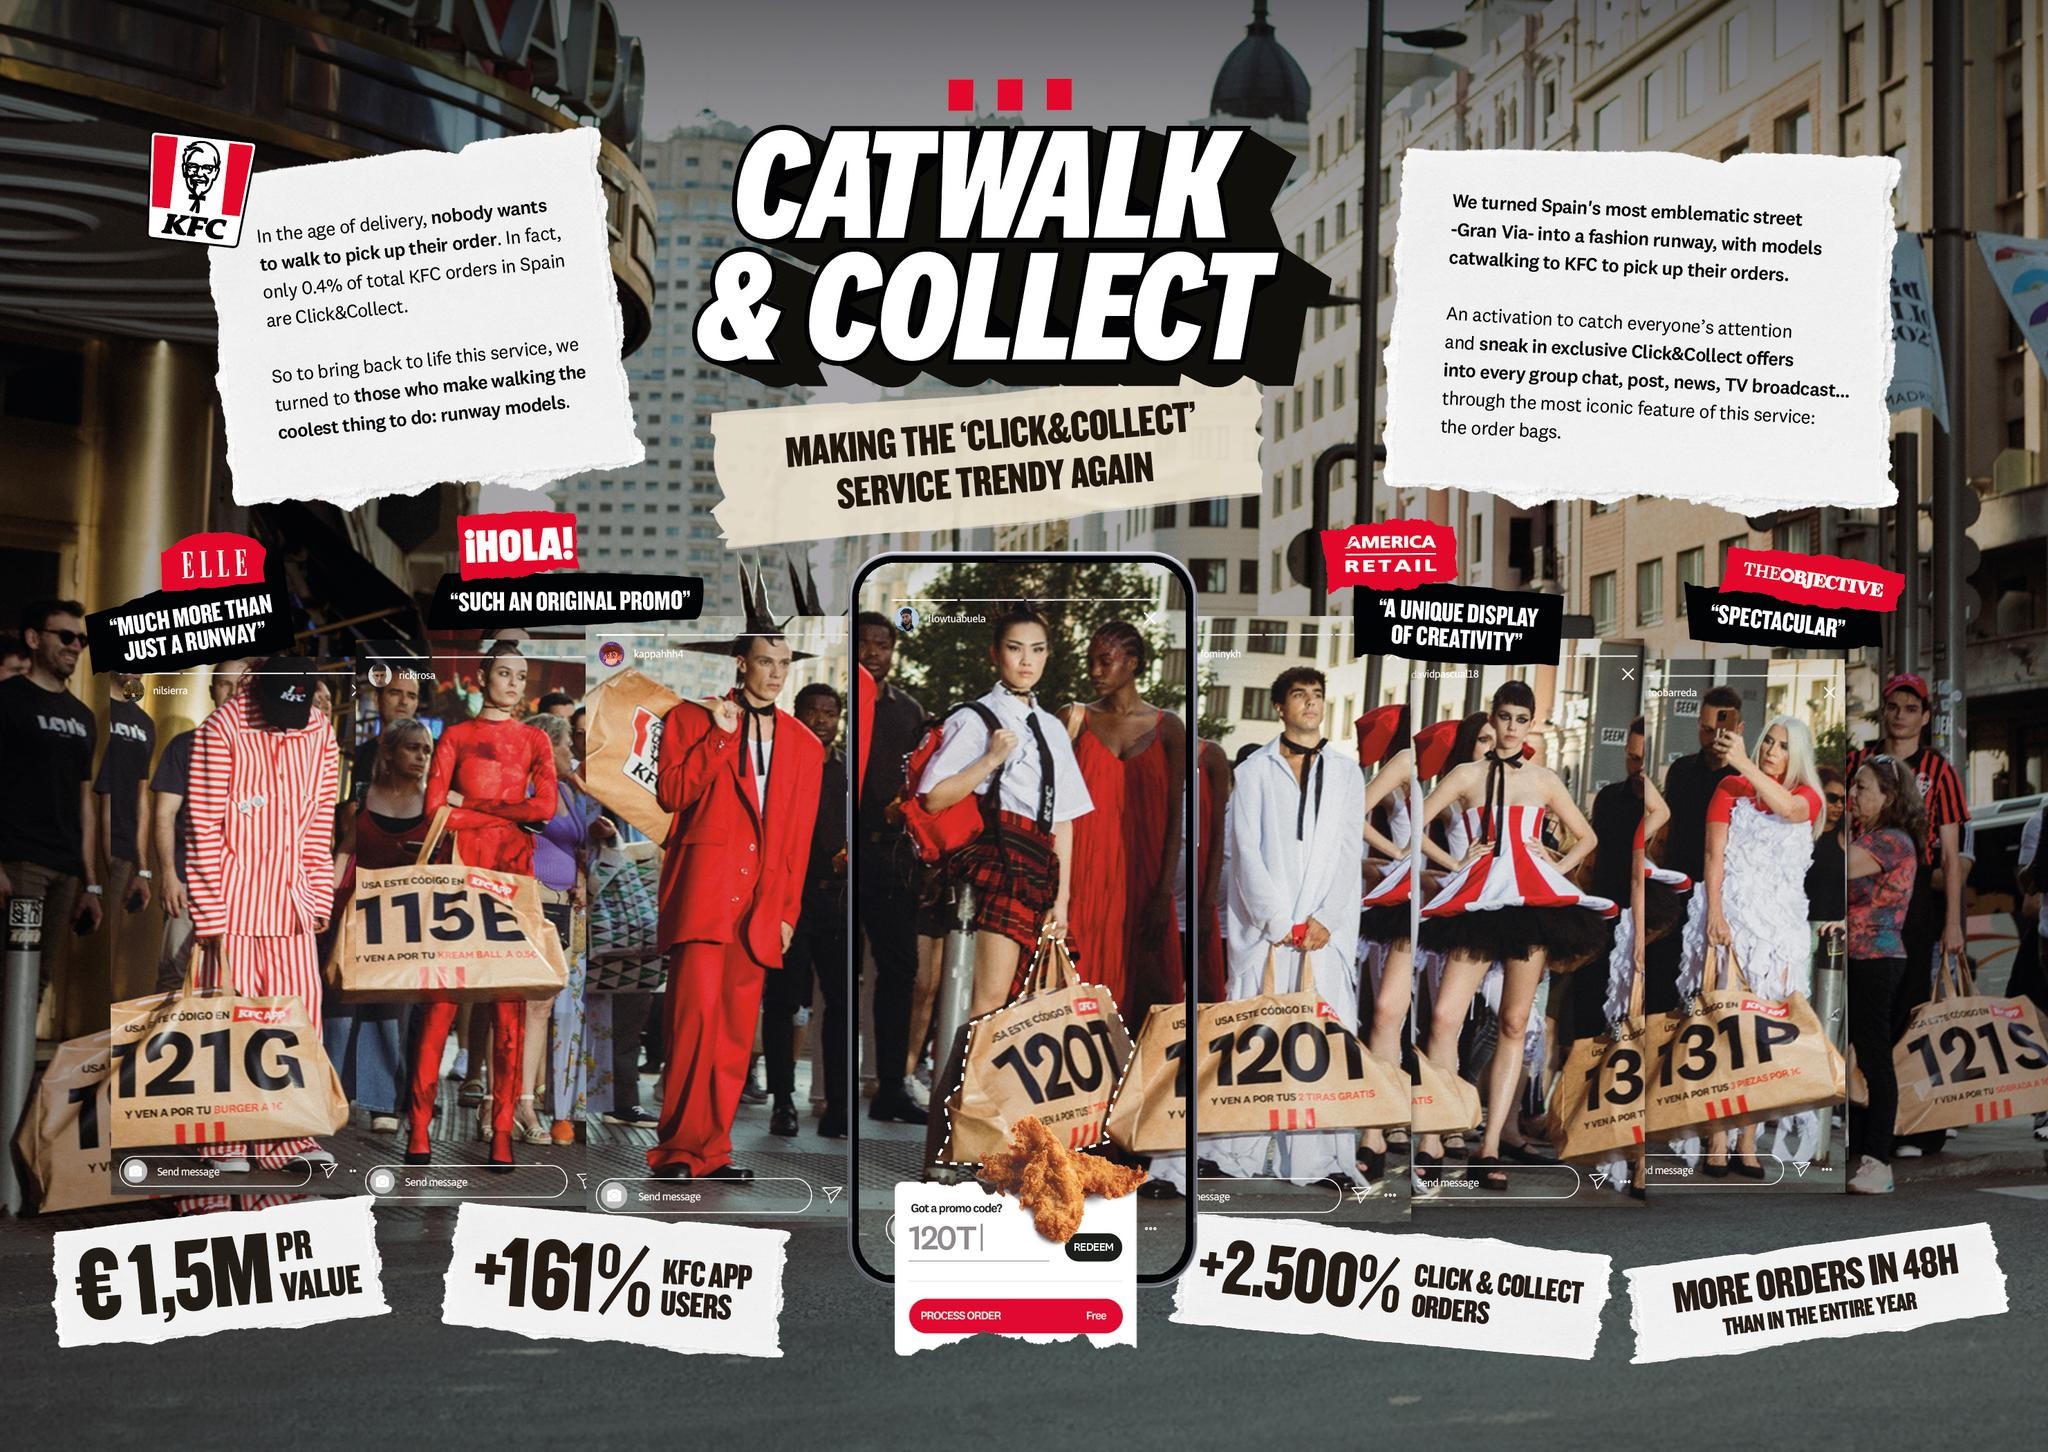 Catwalk&Collect